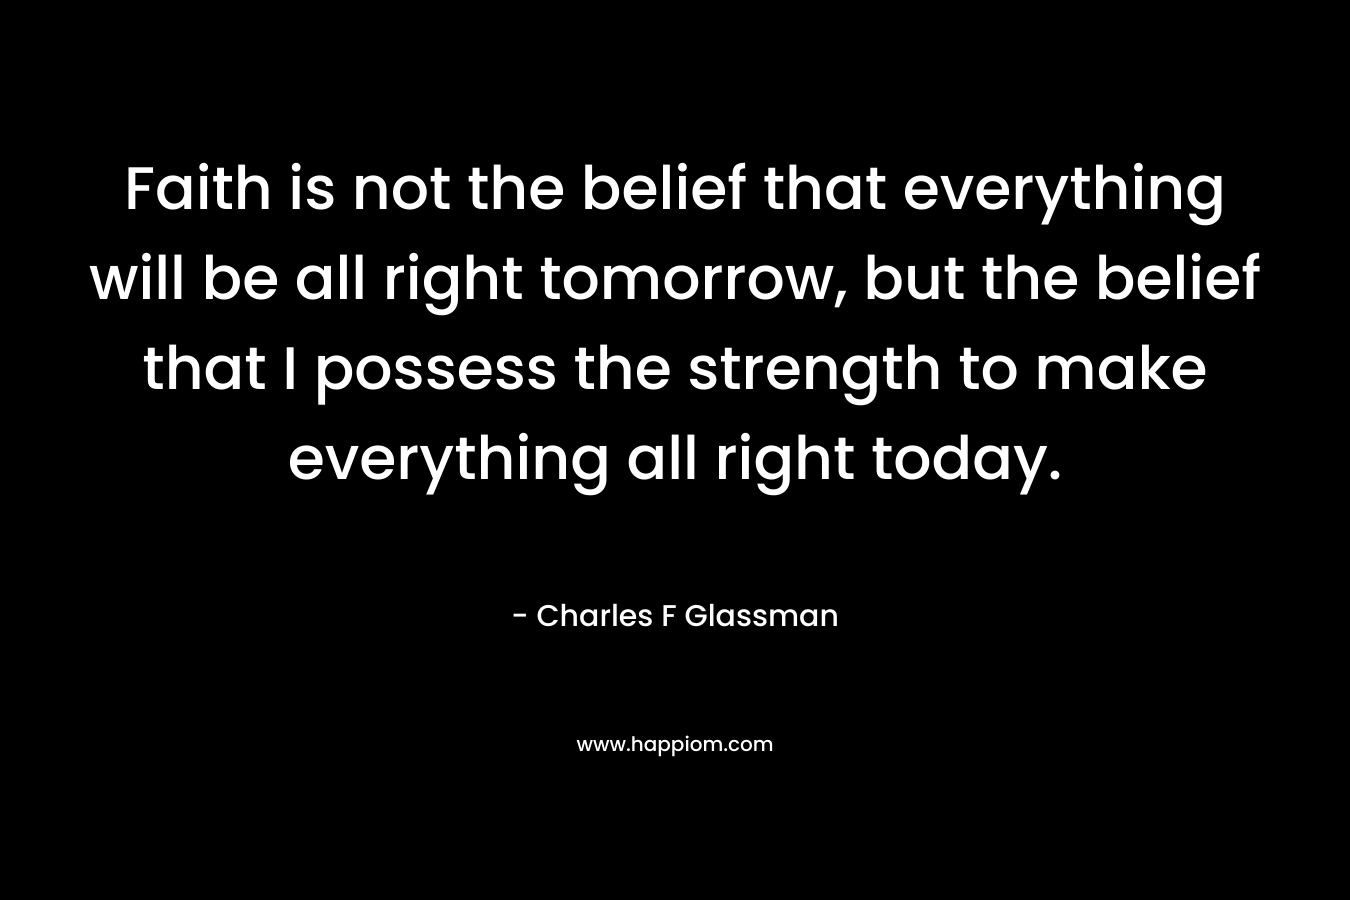 Faith is not the belief that everything will be all right tomorrow, but the belief that I possess the strength to make everything all right today. – Charles F Glassman